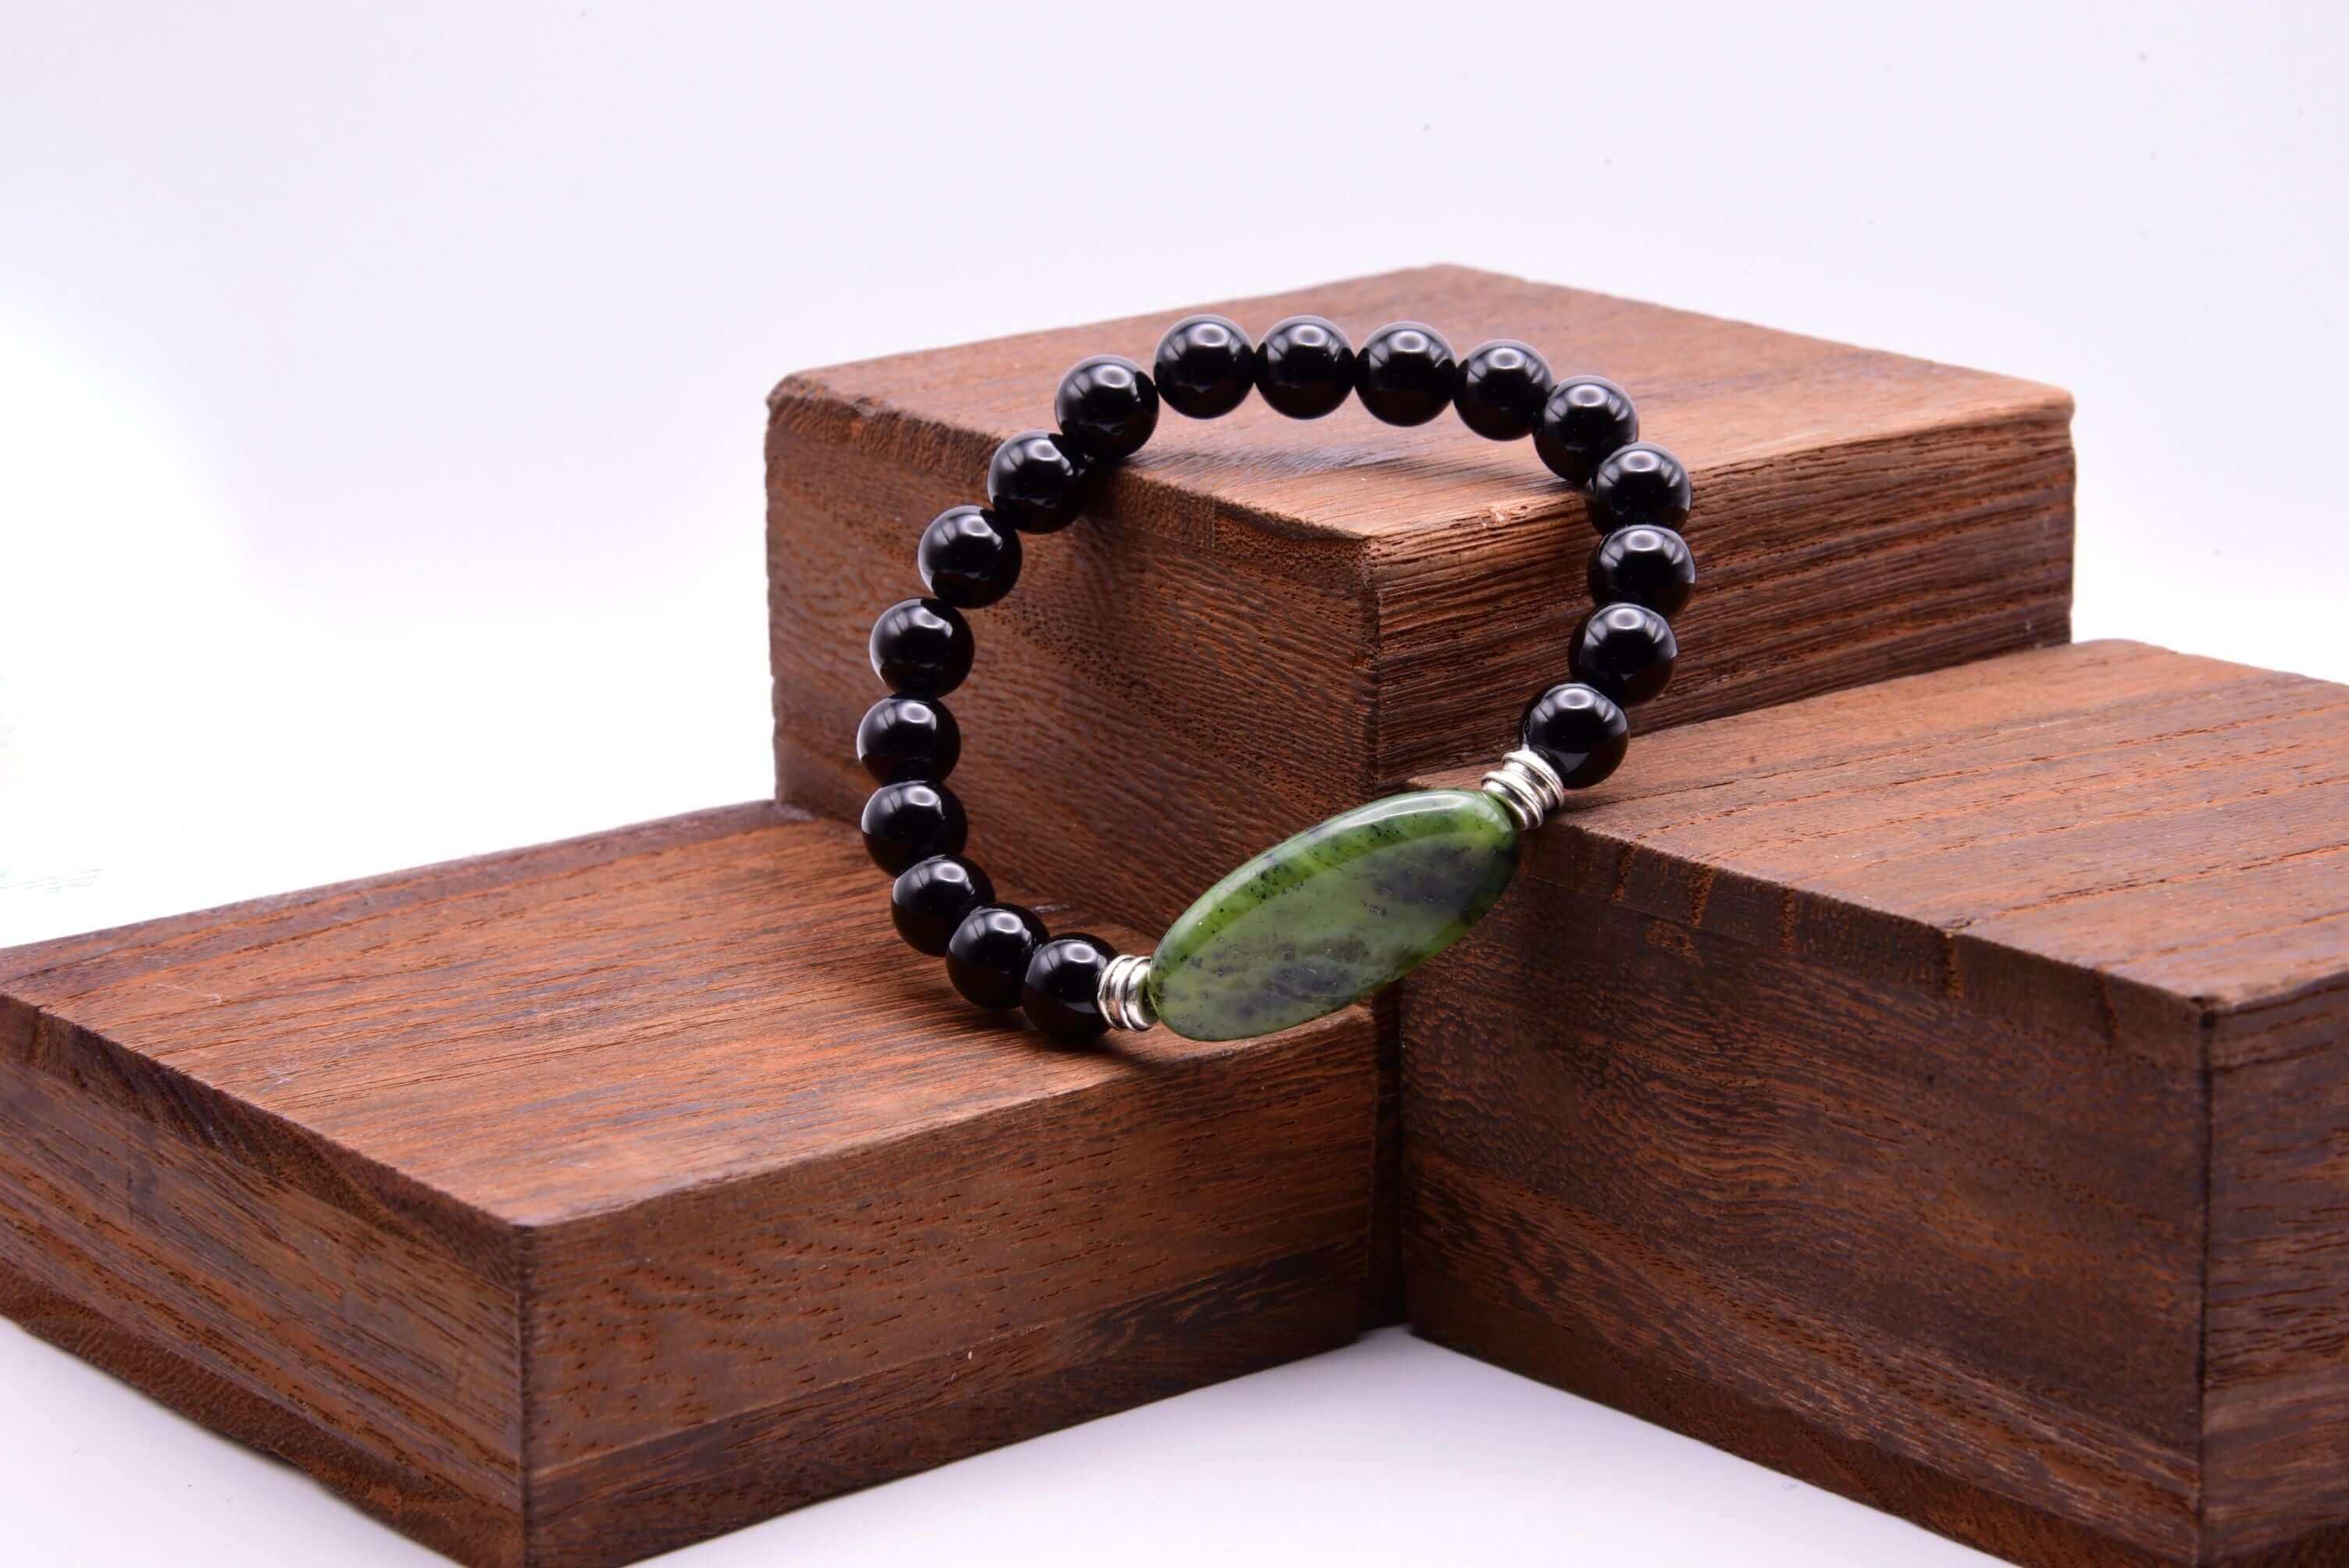 Jade Focal Bracelet This bracelet is made with high-quality Jade and either Black Onyx or Obsidian stones which bring calm and insight to the wearer. Zodiac Signs: Capricorn, Gemini, Libra, Taurus, and Virgo. Chakra: Heart. Handmade with authentic crystal